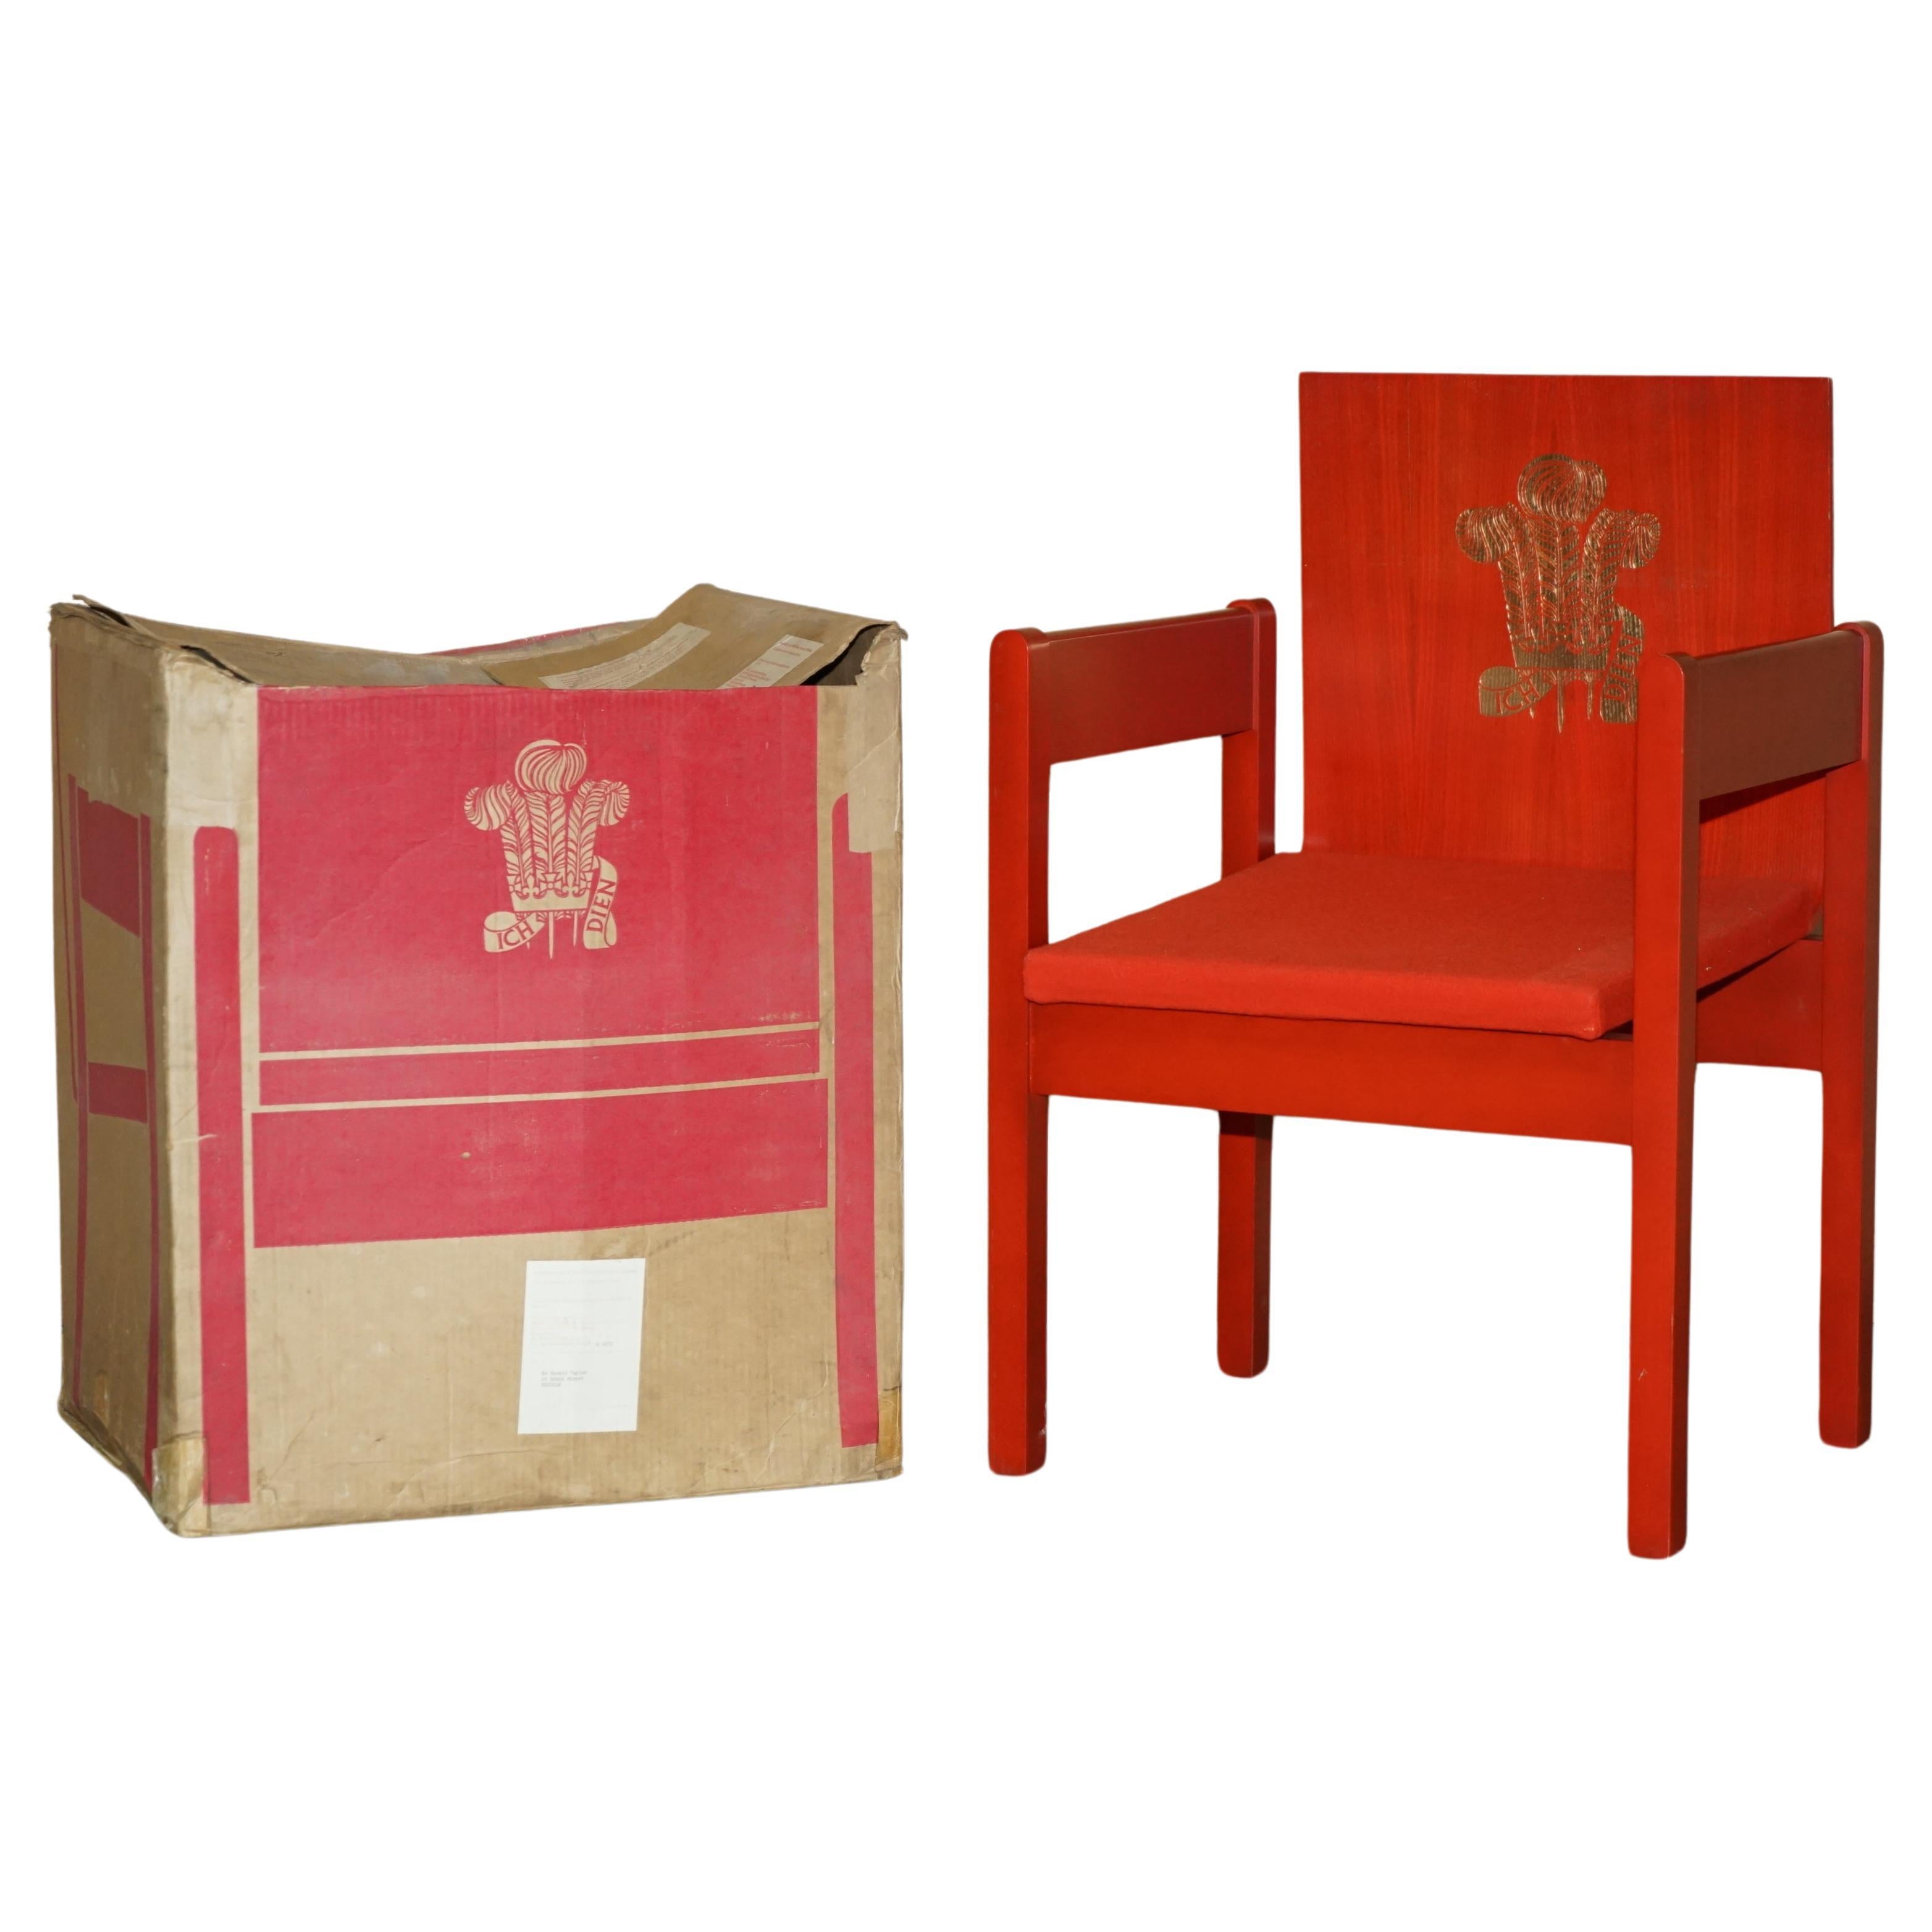 Royal House Antiques

Royal House Antiques is delighted to offer for sale this unique opportunity to purchase the last of its kind, a brand new in the box 1969 Prince Charles Investiture armchair complete with an archive of documentation including